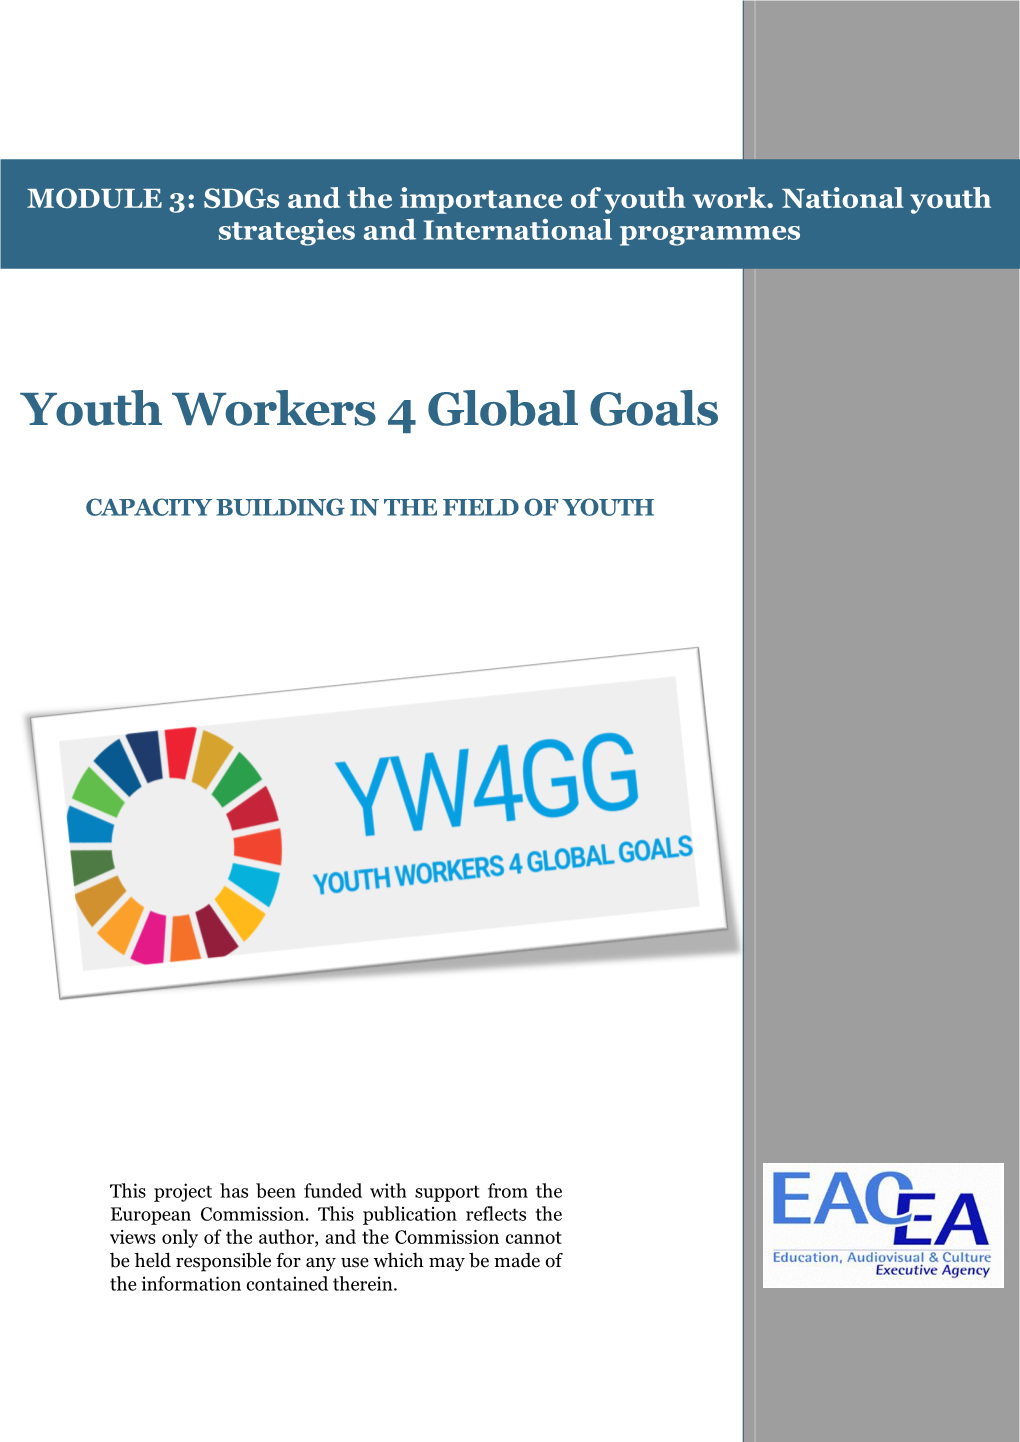 MODULE 3: Sdgs and the Importance of Youth Work. National Youth Strategies and International Programmes